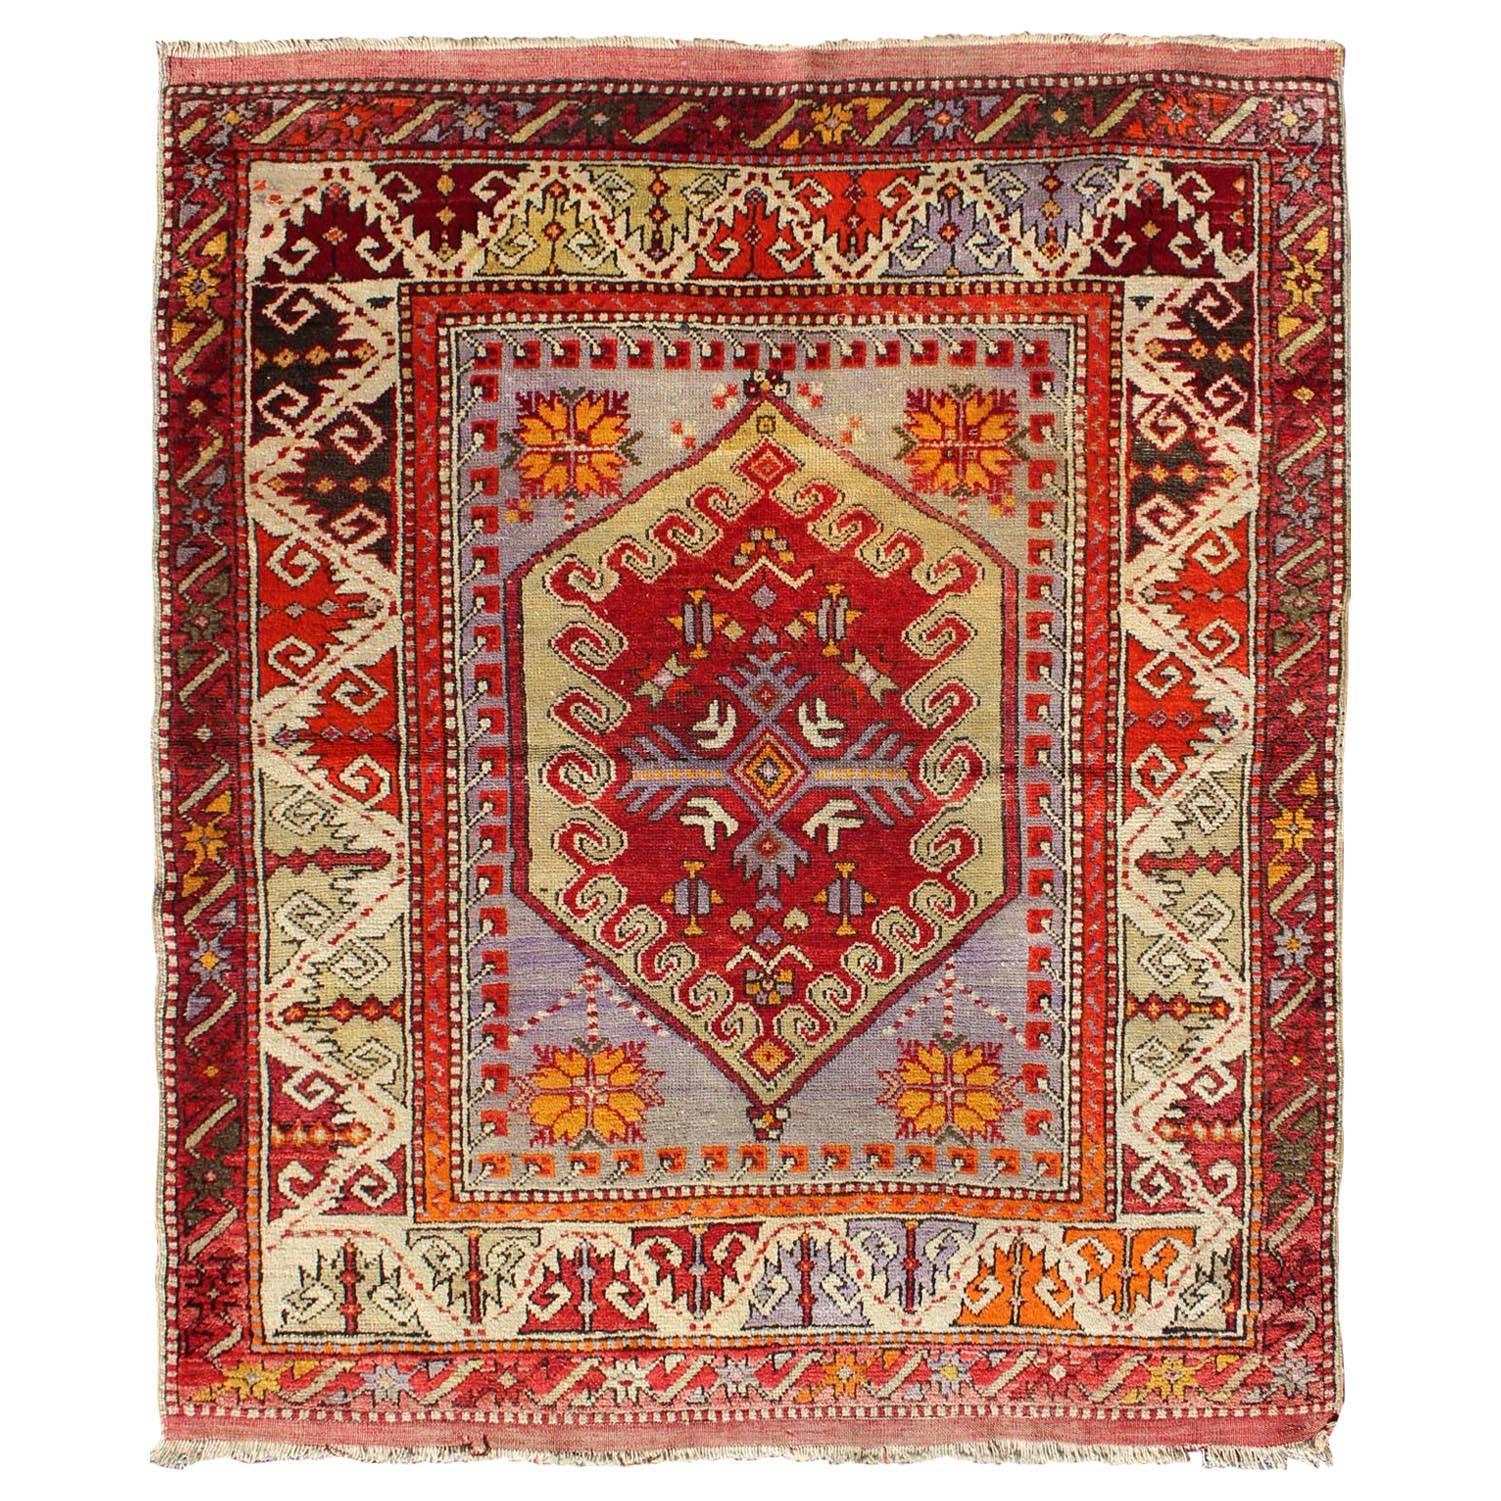 Colorful Early 20th Century Antique Turkish Oushak Rug with Medallion in Purple